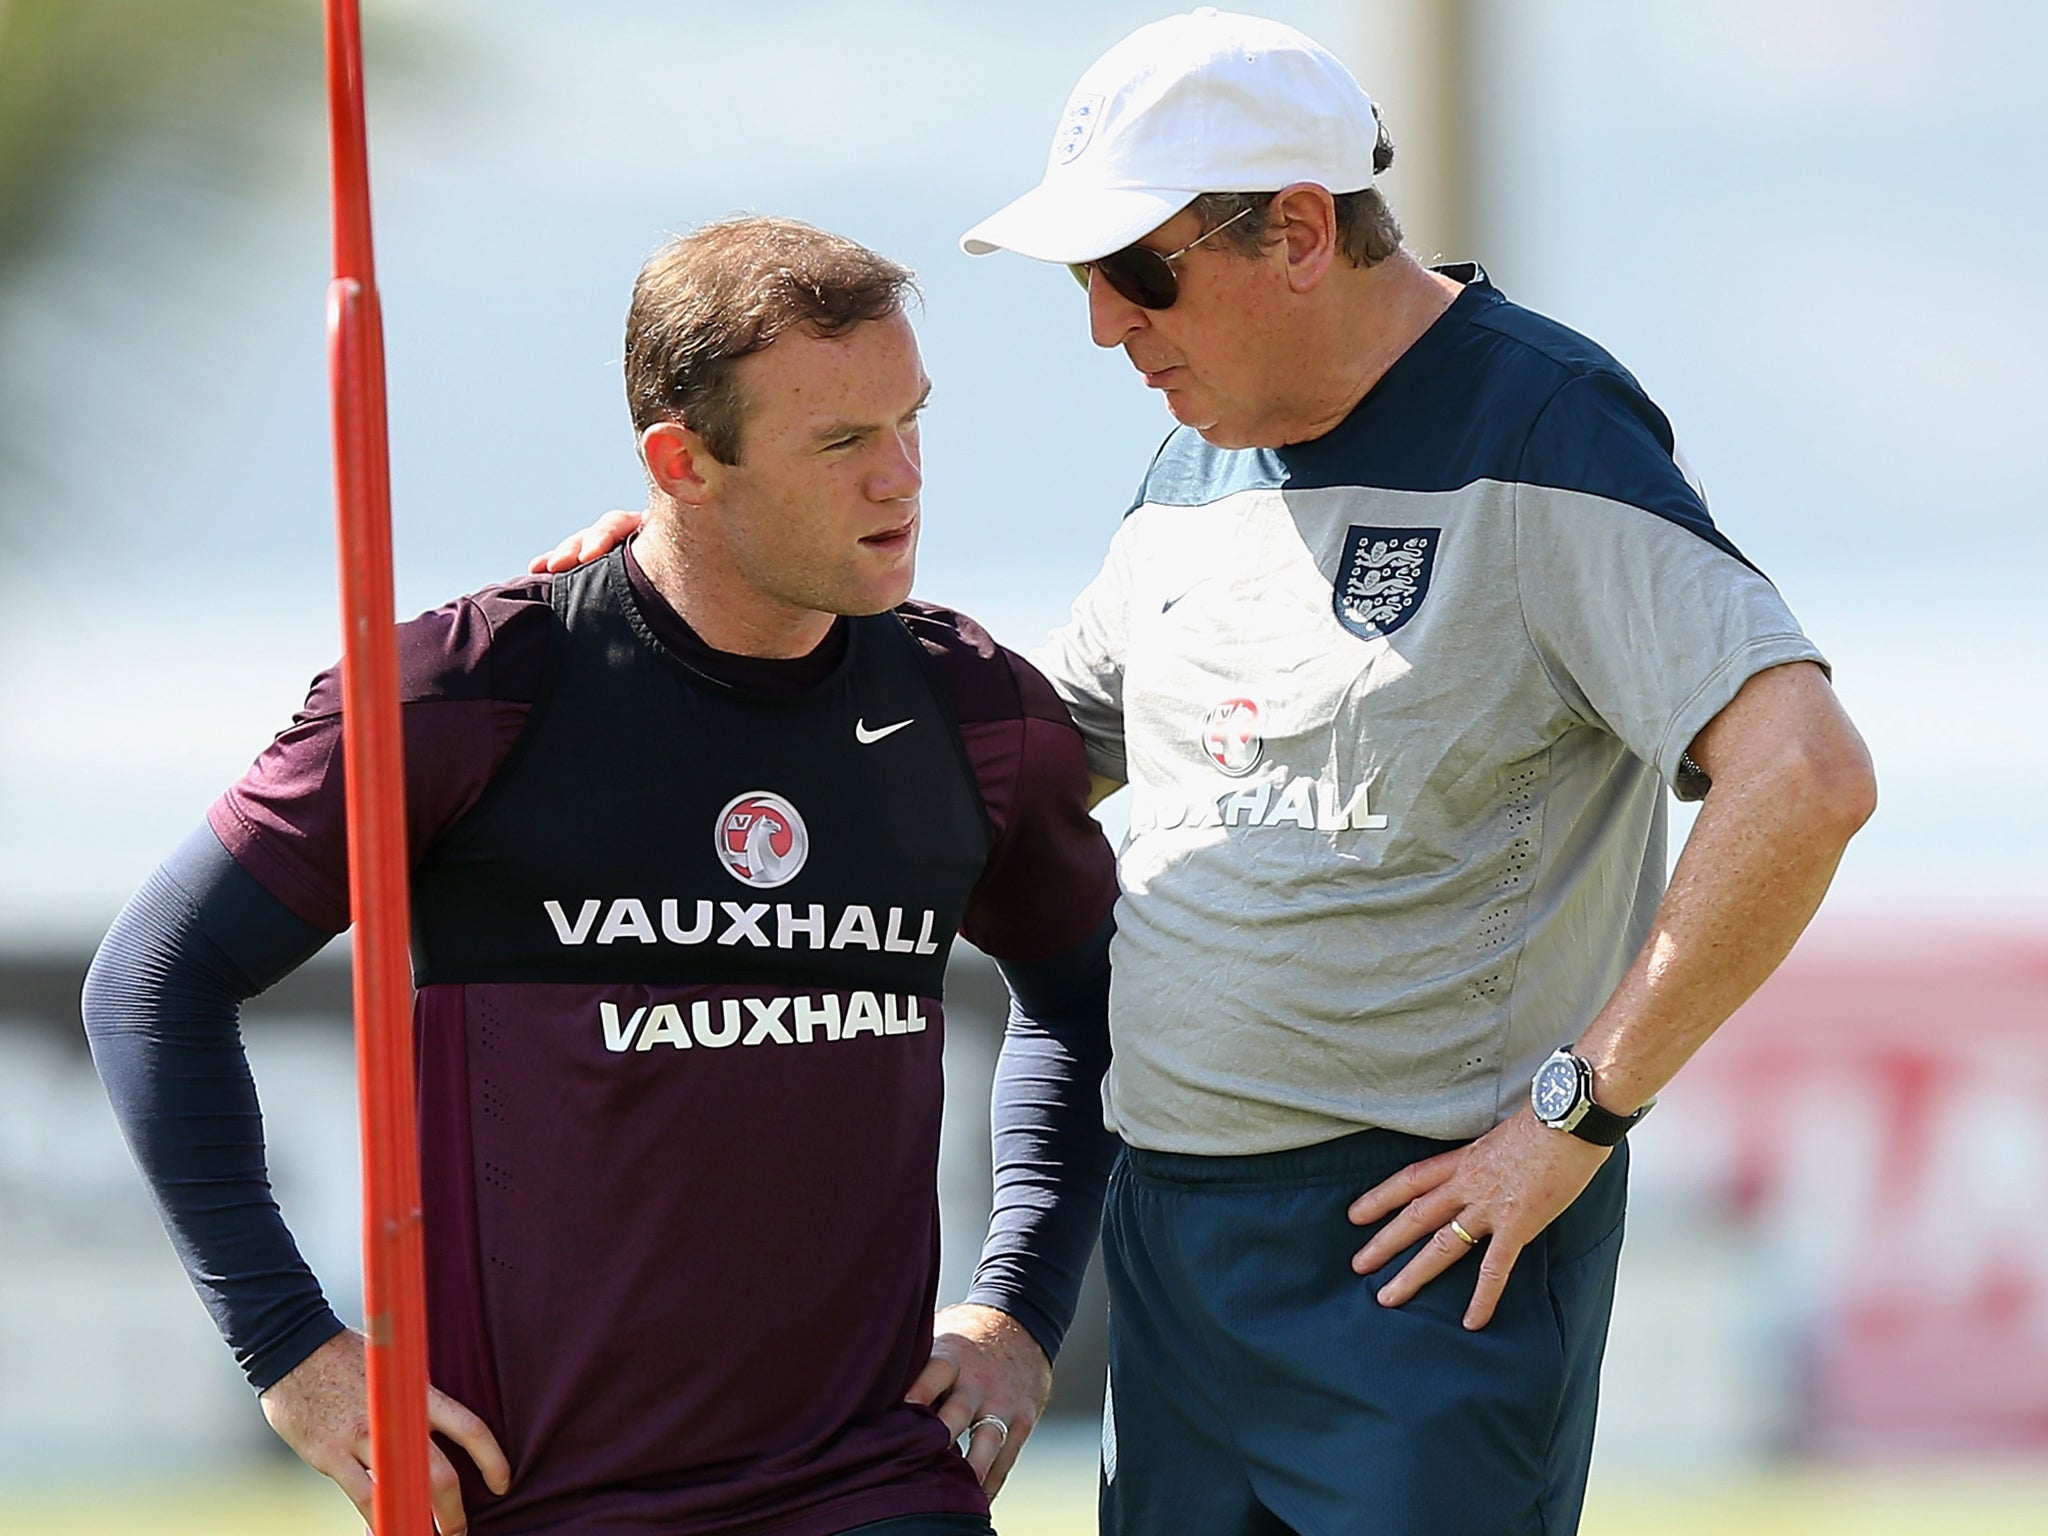 Roy Hodgson has hined that Wayne Rooney could be the next England captain